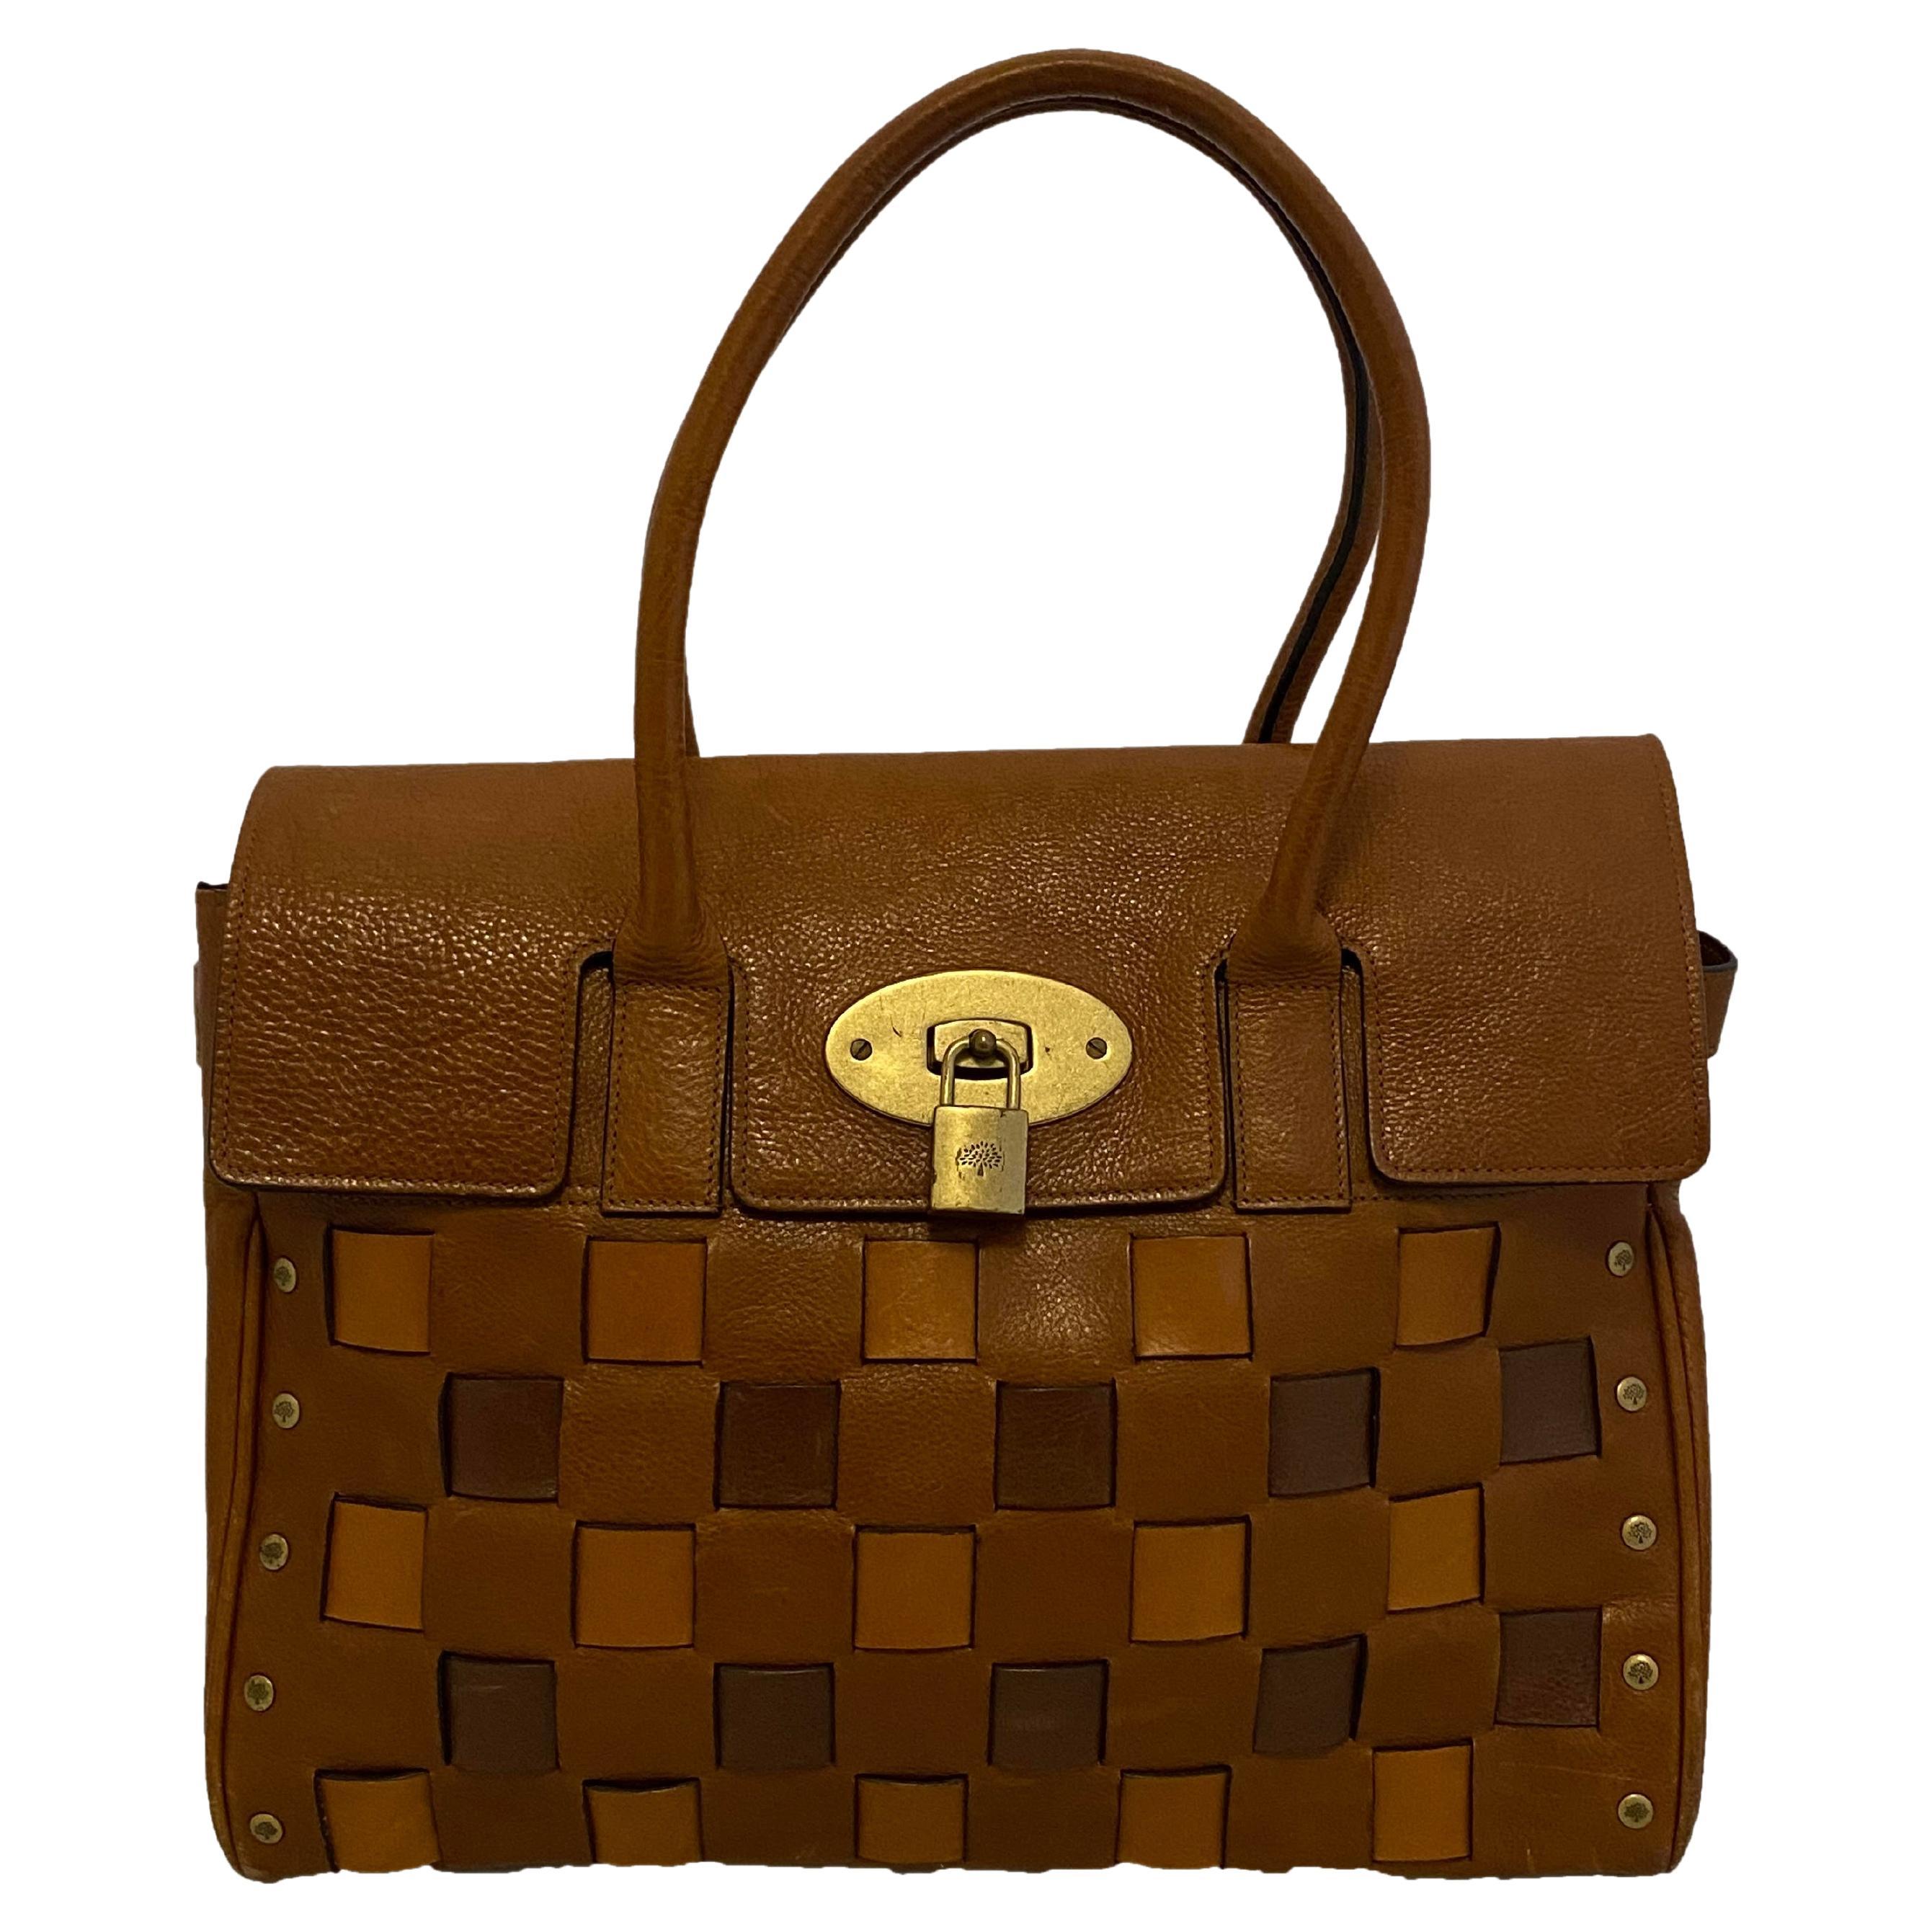 Woven Leather Mulberry Bayswater Bag For Sale